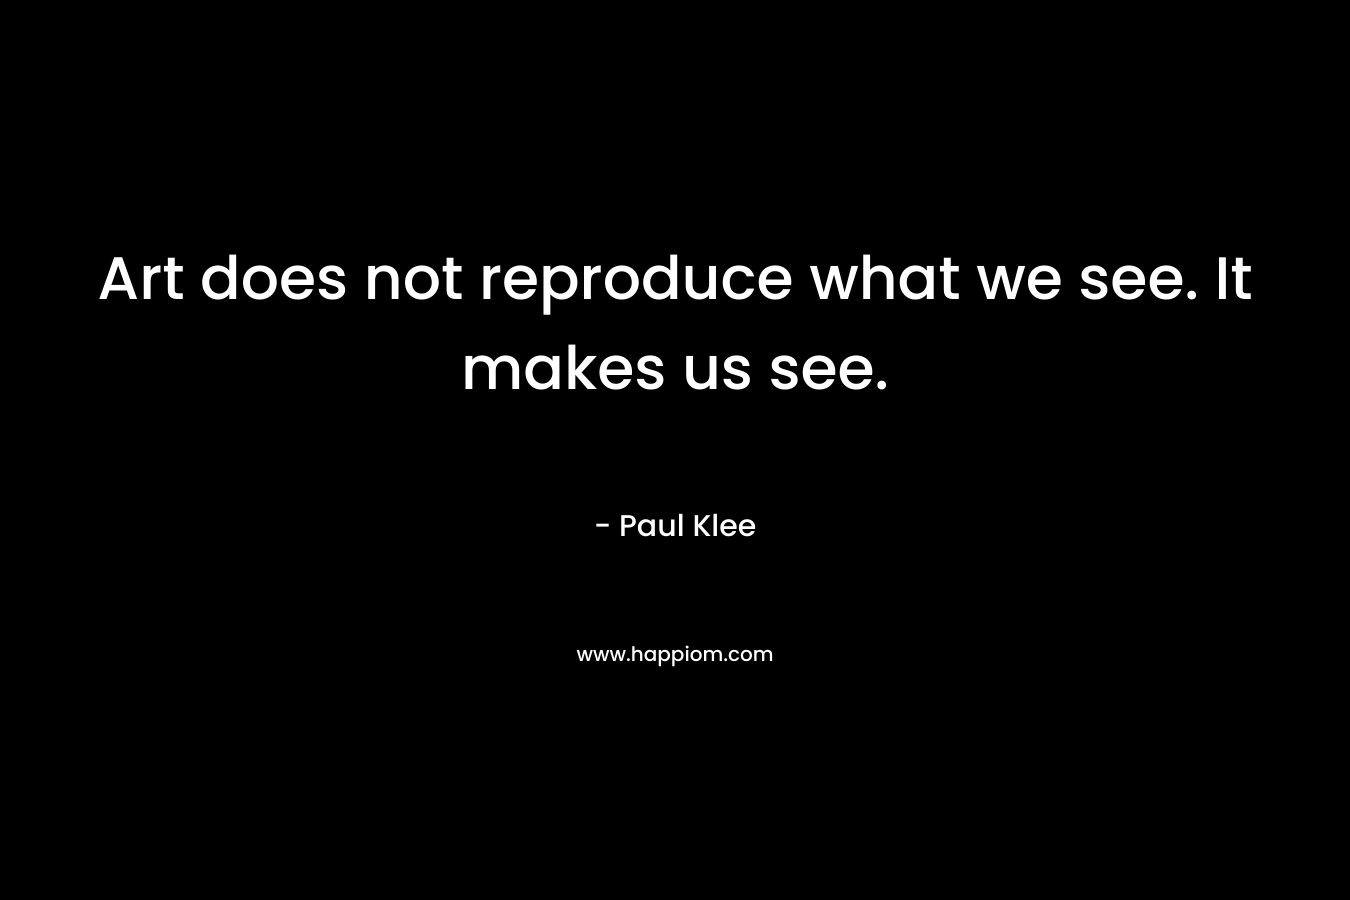 Art does not reproduce what we see. It makes us see. – Paul Klee